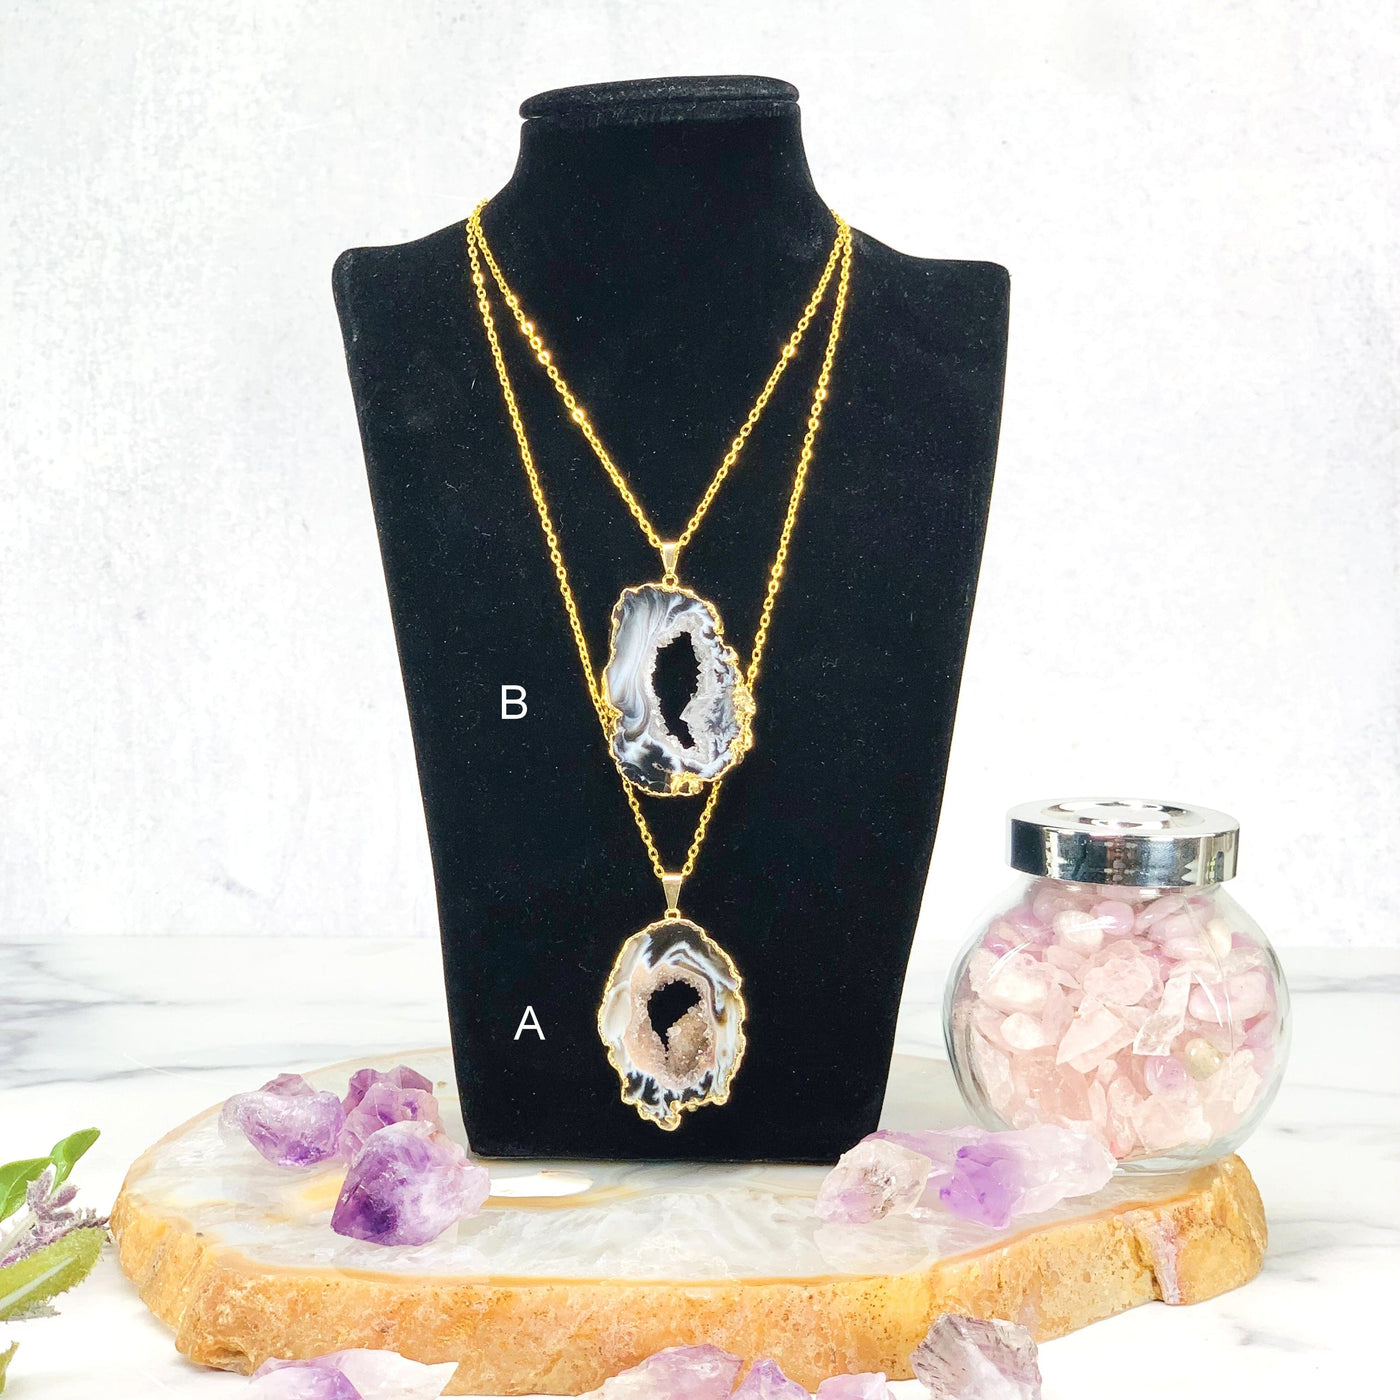 Display of 2 Agate Druzy Slice Pendant with Electroplated Gold Edge with chain on mannequin